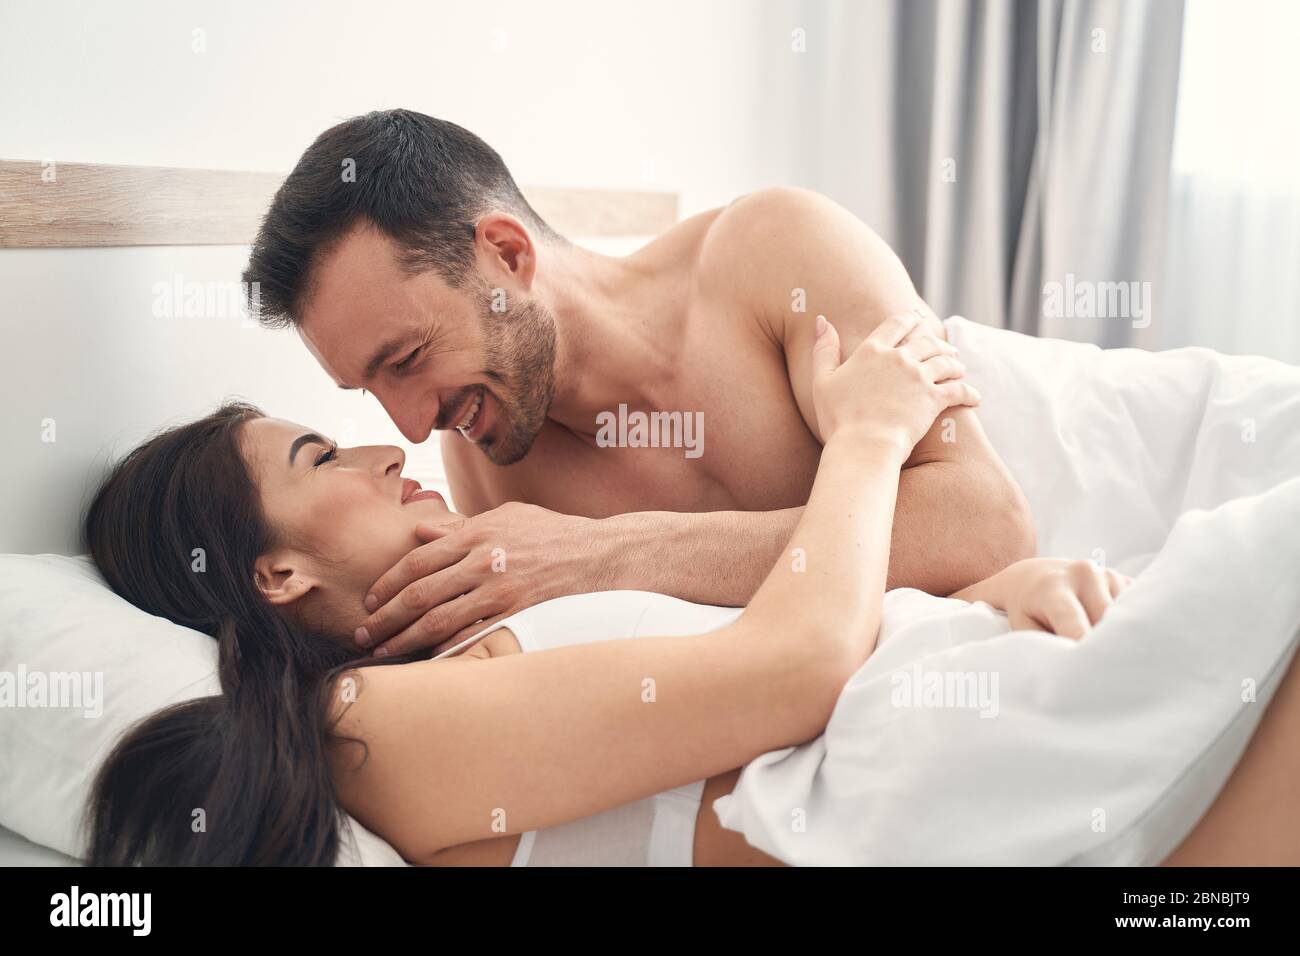 Man Opening Her Bra In Bedroom Stock Photo, Picture and Royalty